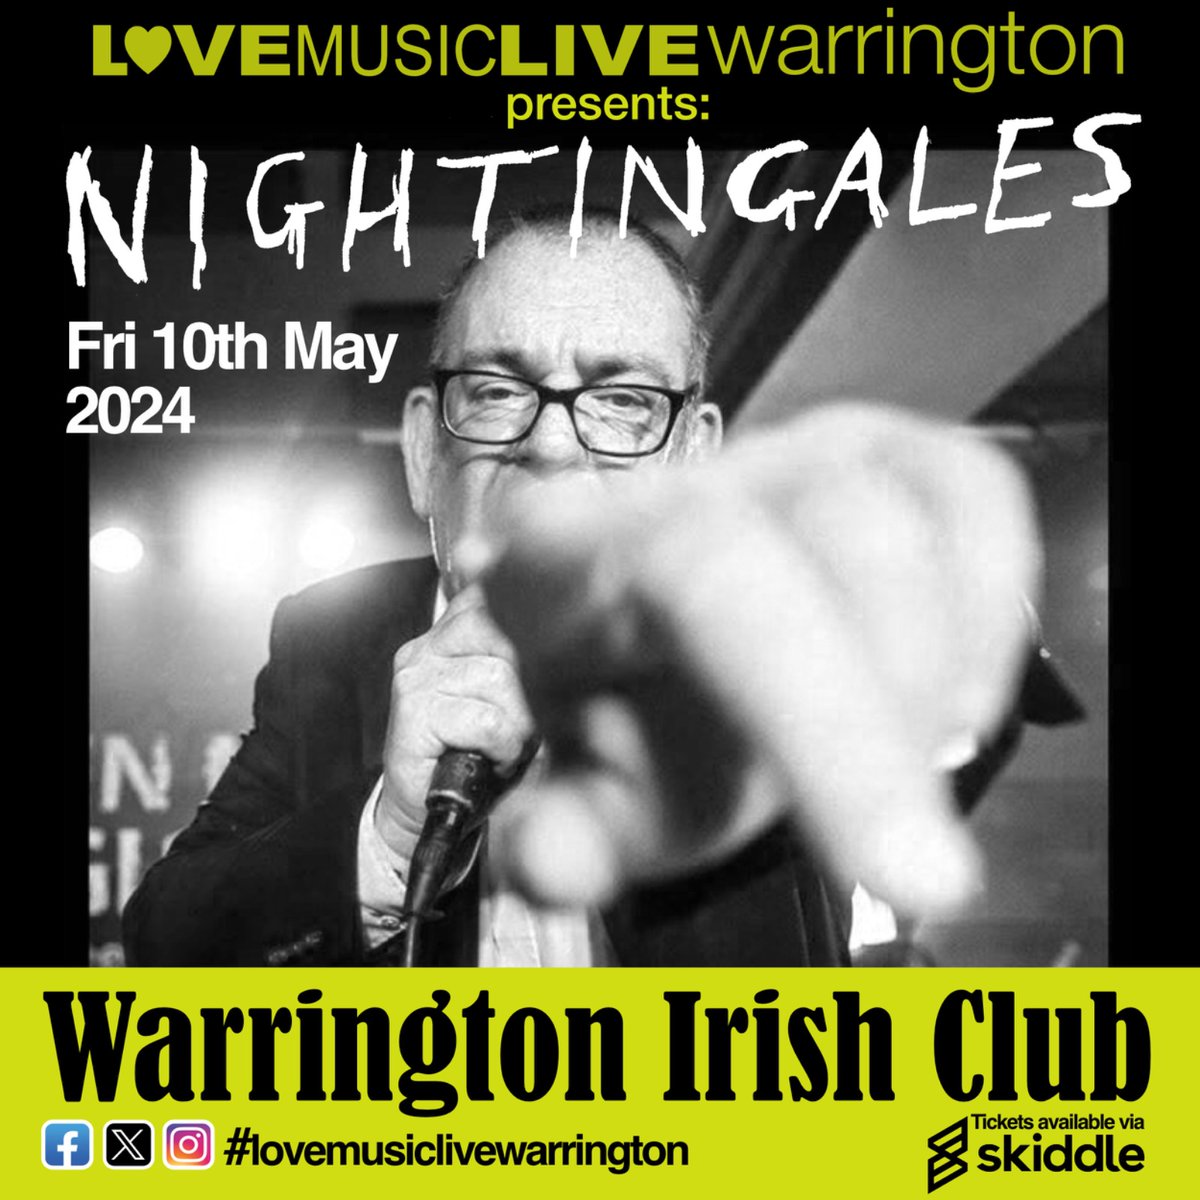 The Nightingales finally play WARRINGTON IRISH CLUB!!! Ticket link 👇 skiddle.com/e/37137401 Have YOU got yours yet??!!!